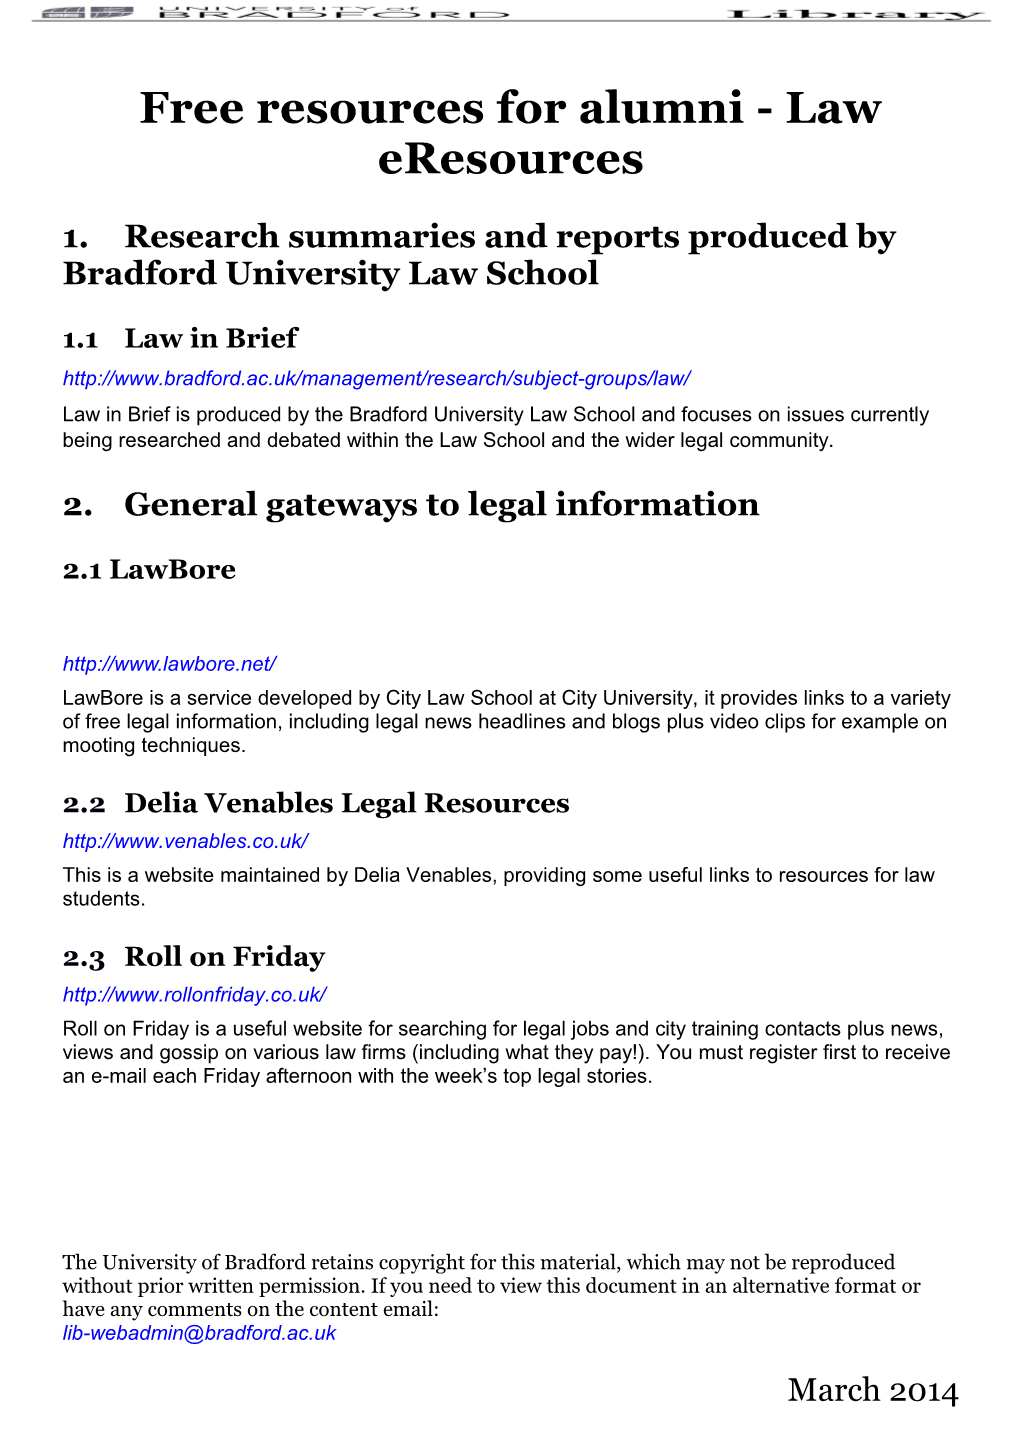 Free Resources for Alumni - Law Eresources